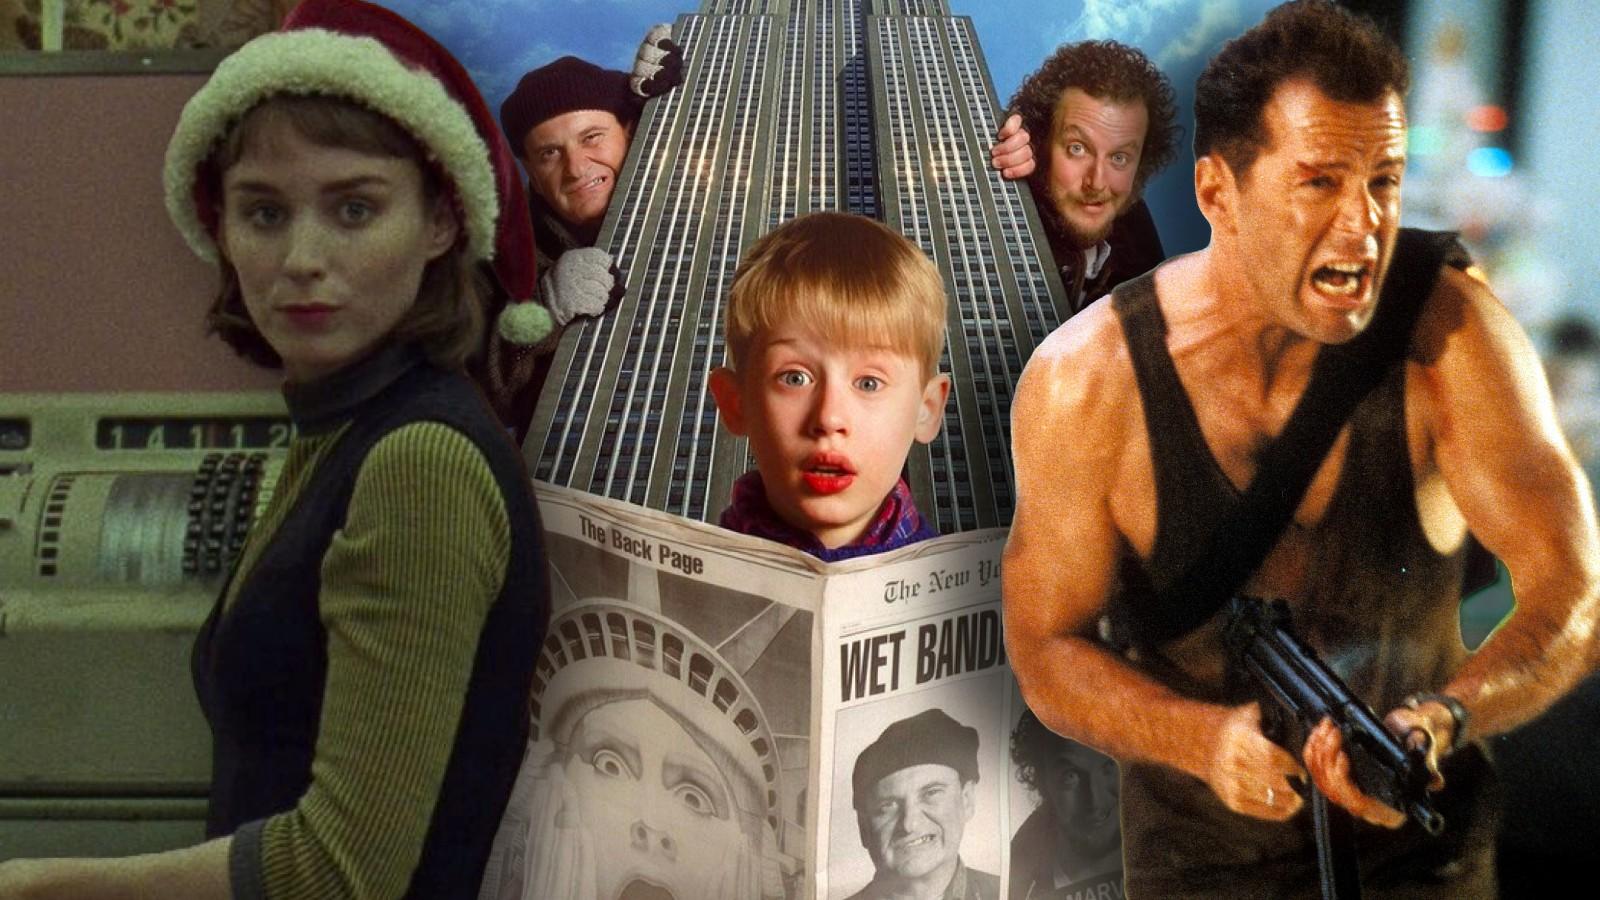 Stills from Carol, Home Alone 2, and Die Hard